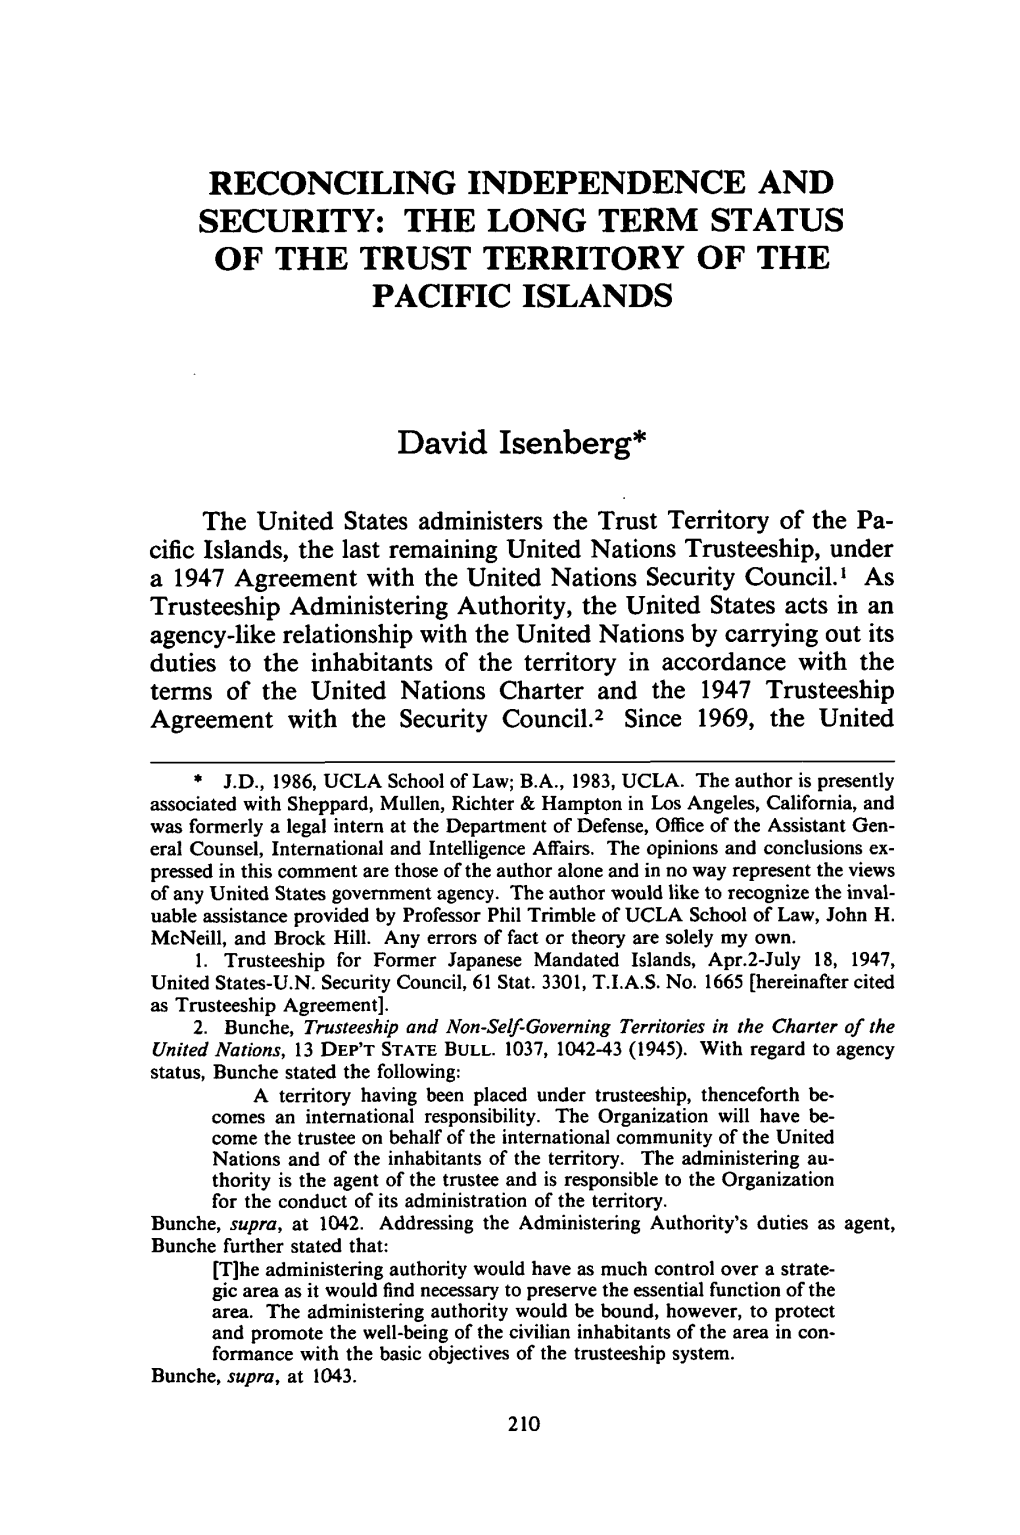 The Long Term Status of the Trust Territory of the Pacific Islands